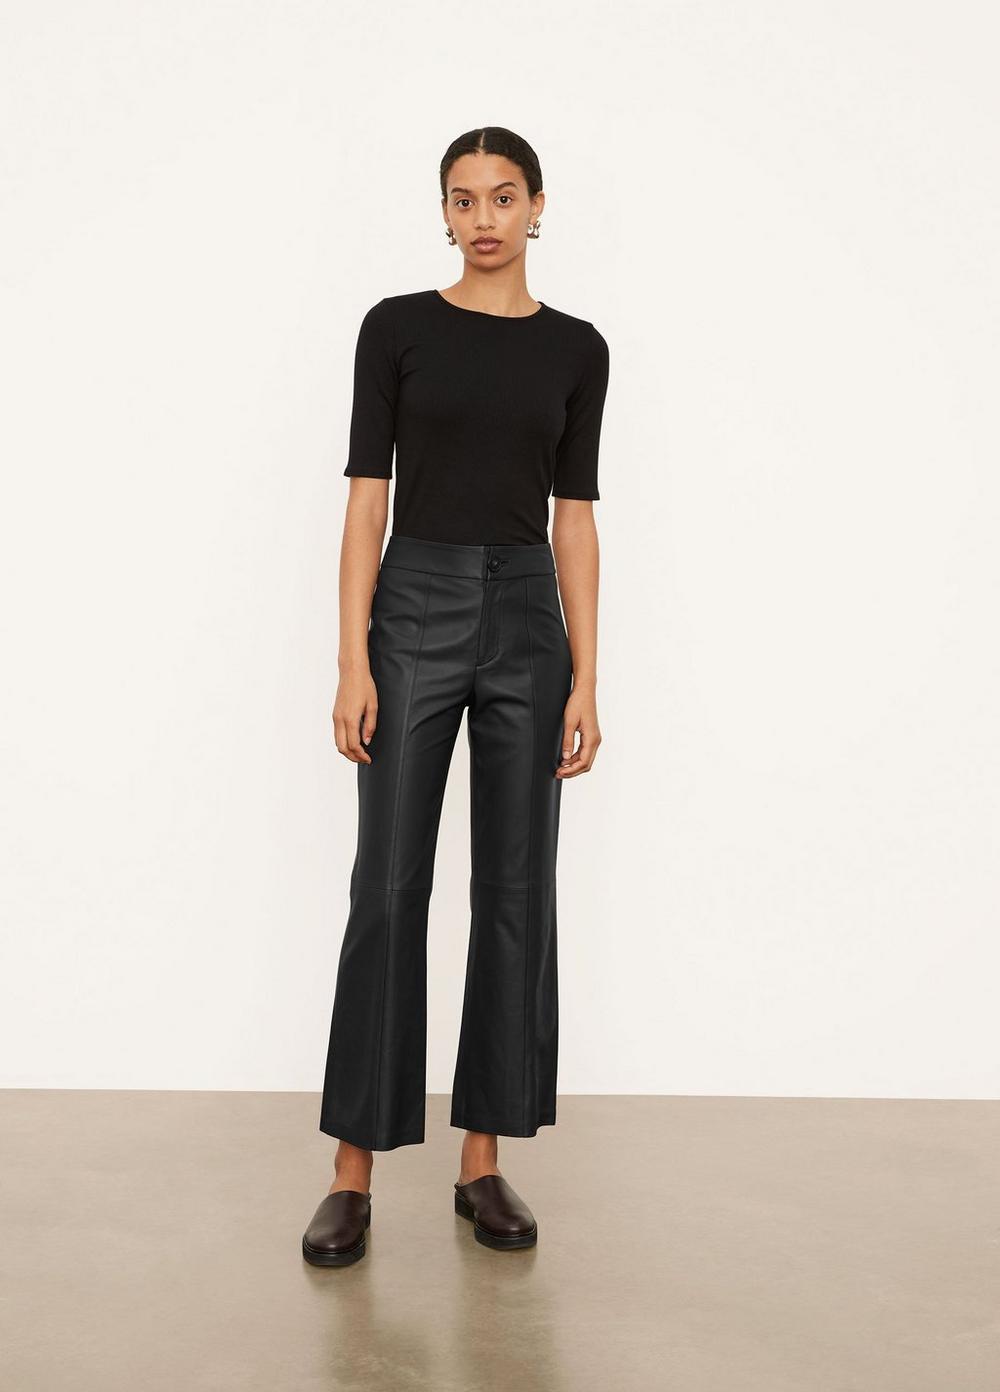 Vince | Leather Flare Pant in Black | Vince Unfold